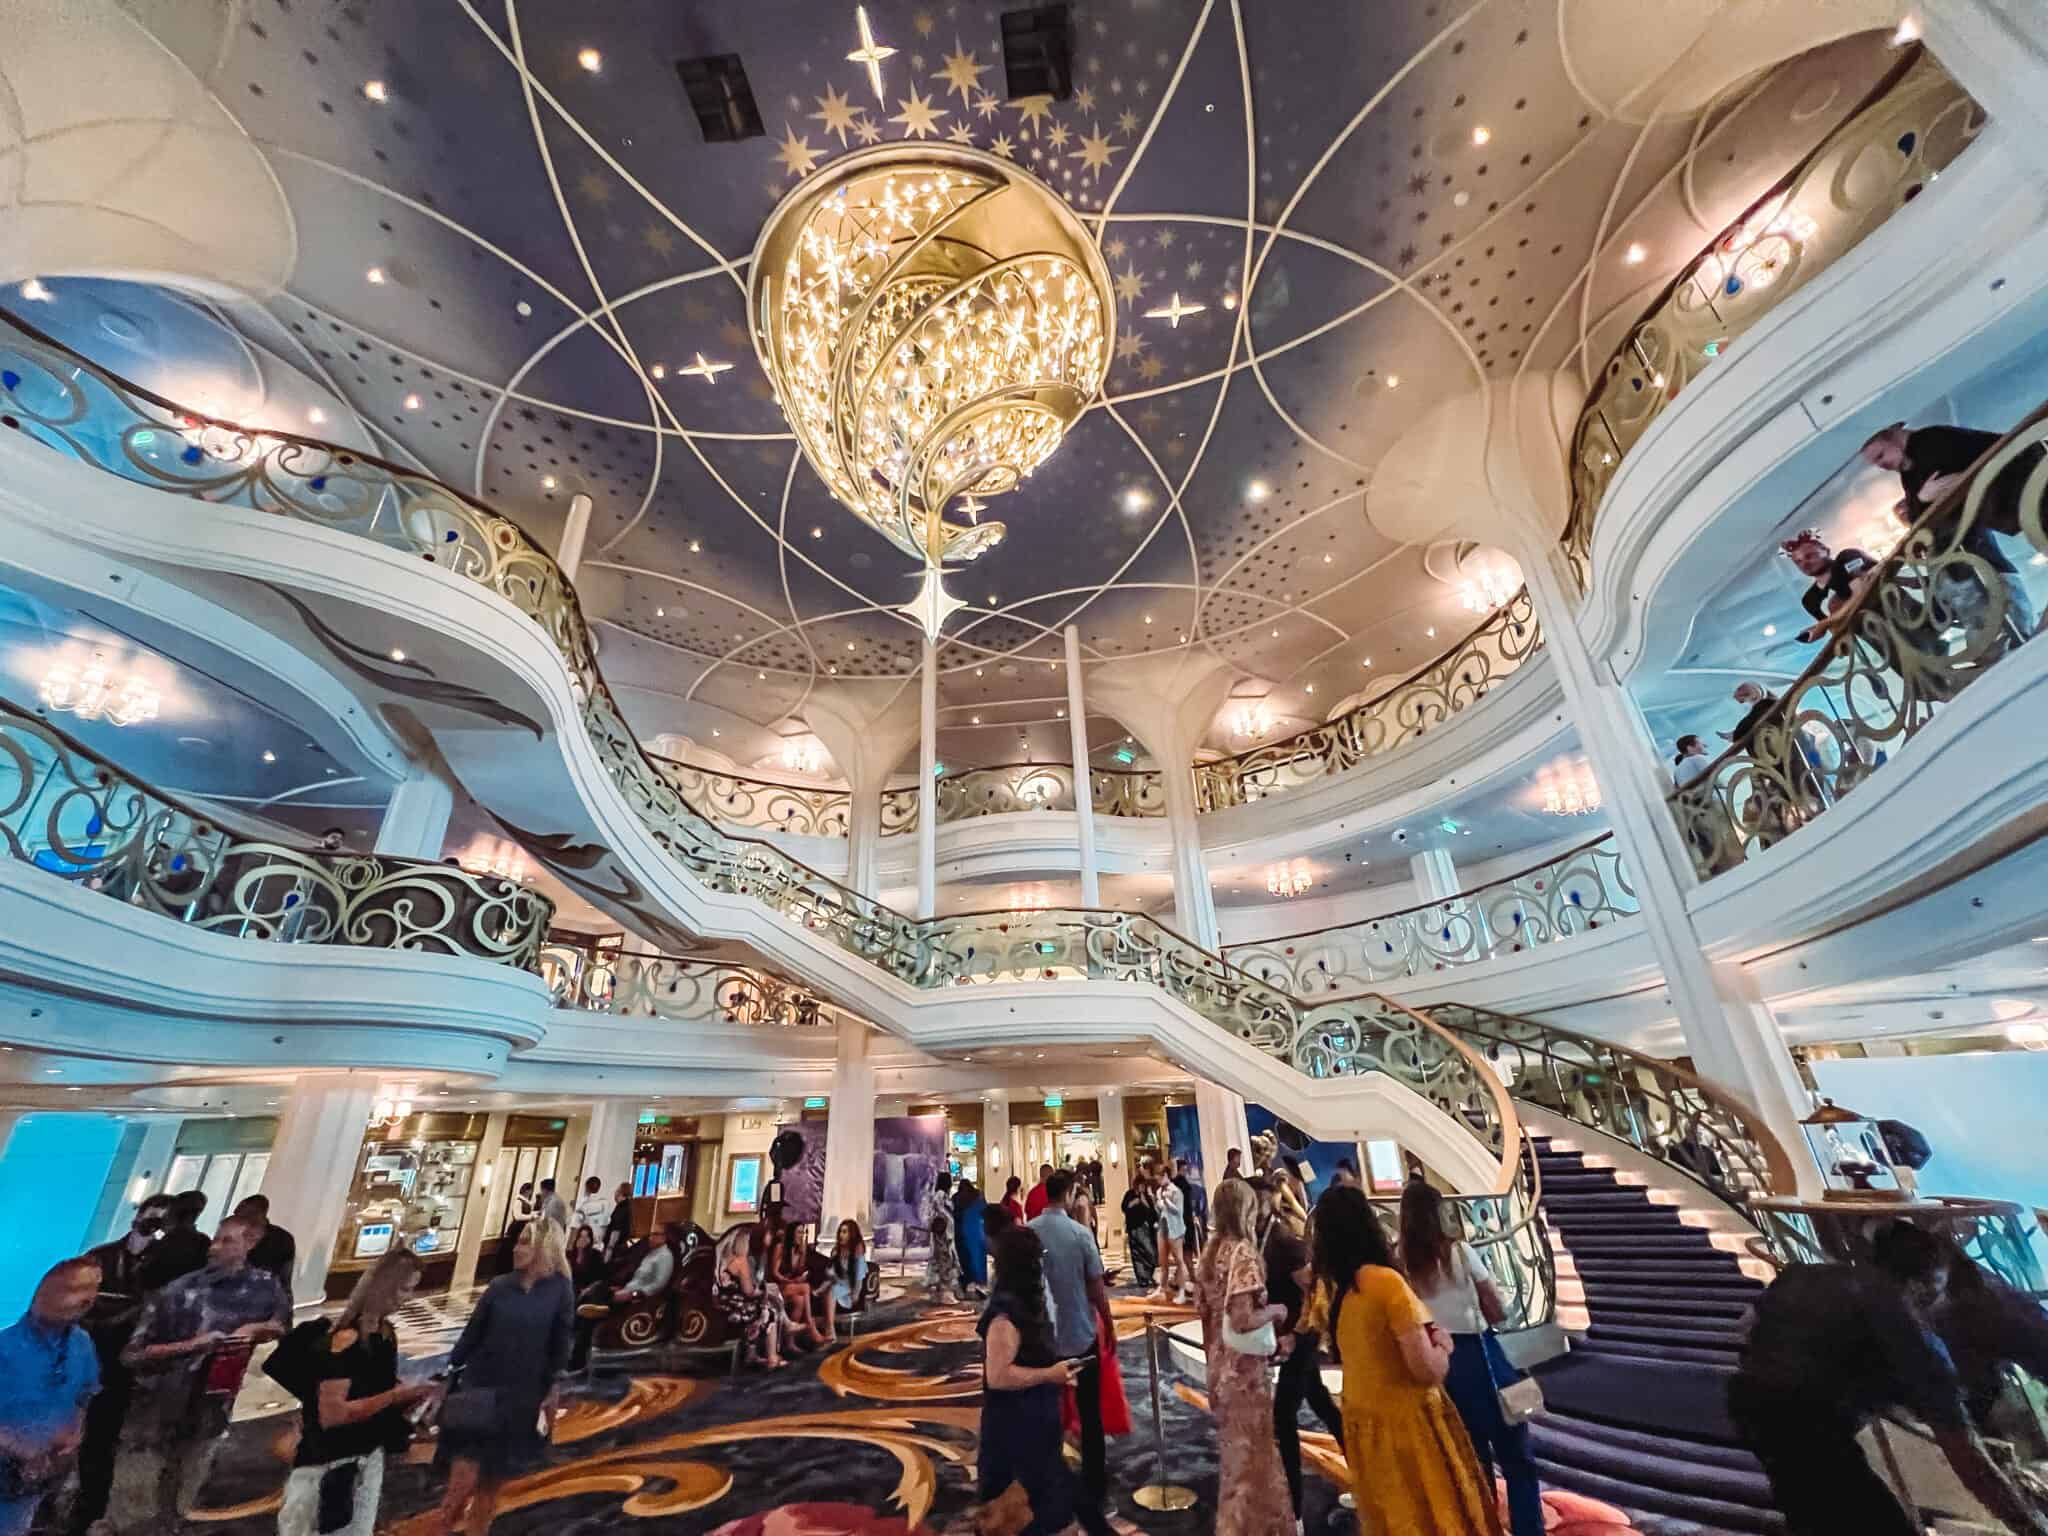 Discover why the new Disney Wish is the best cruise for families. Stellar food, entertainment and rooms.